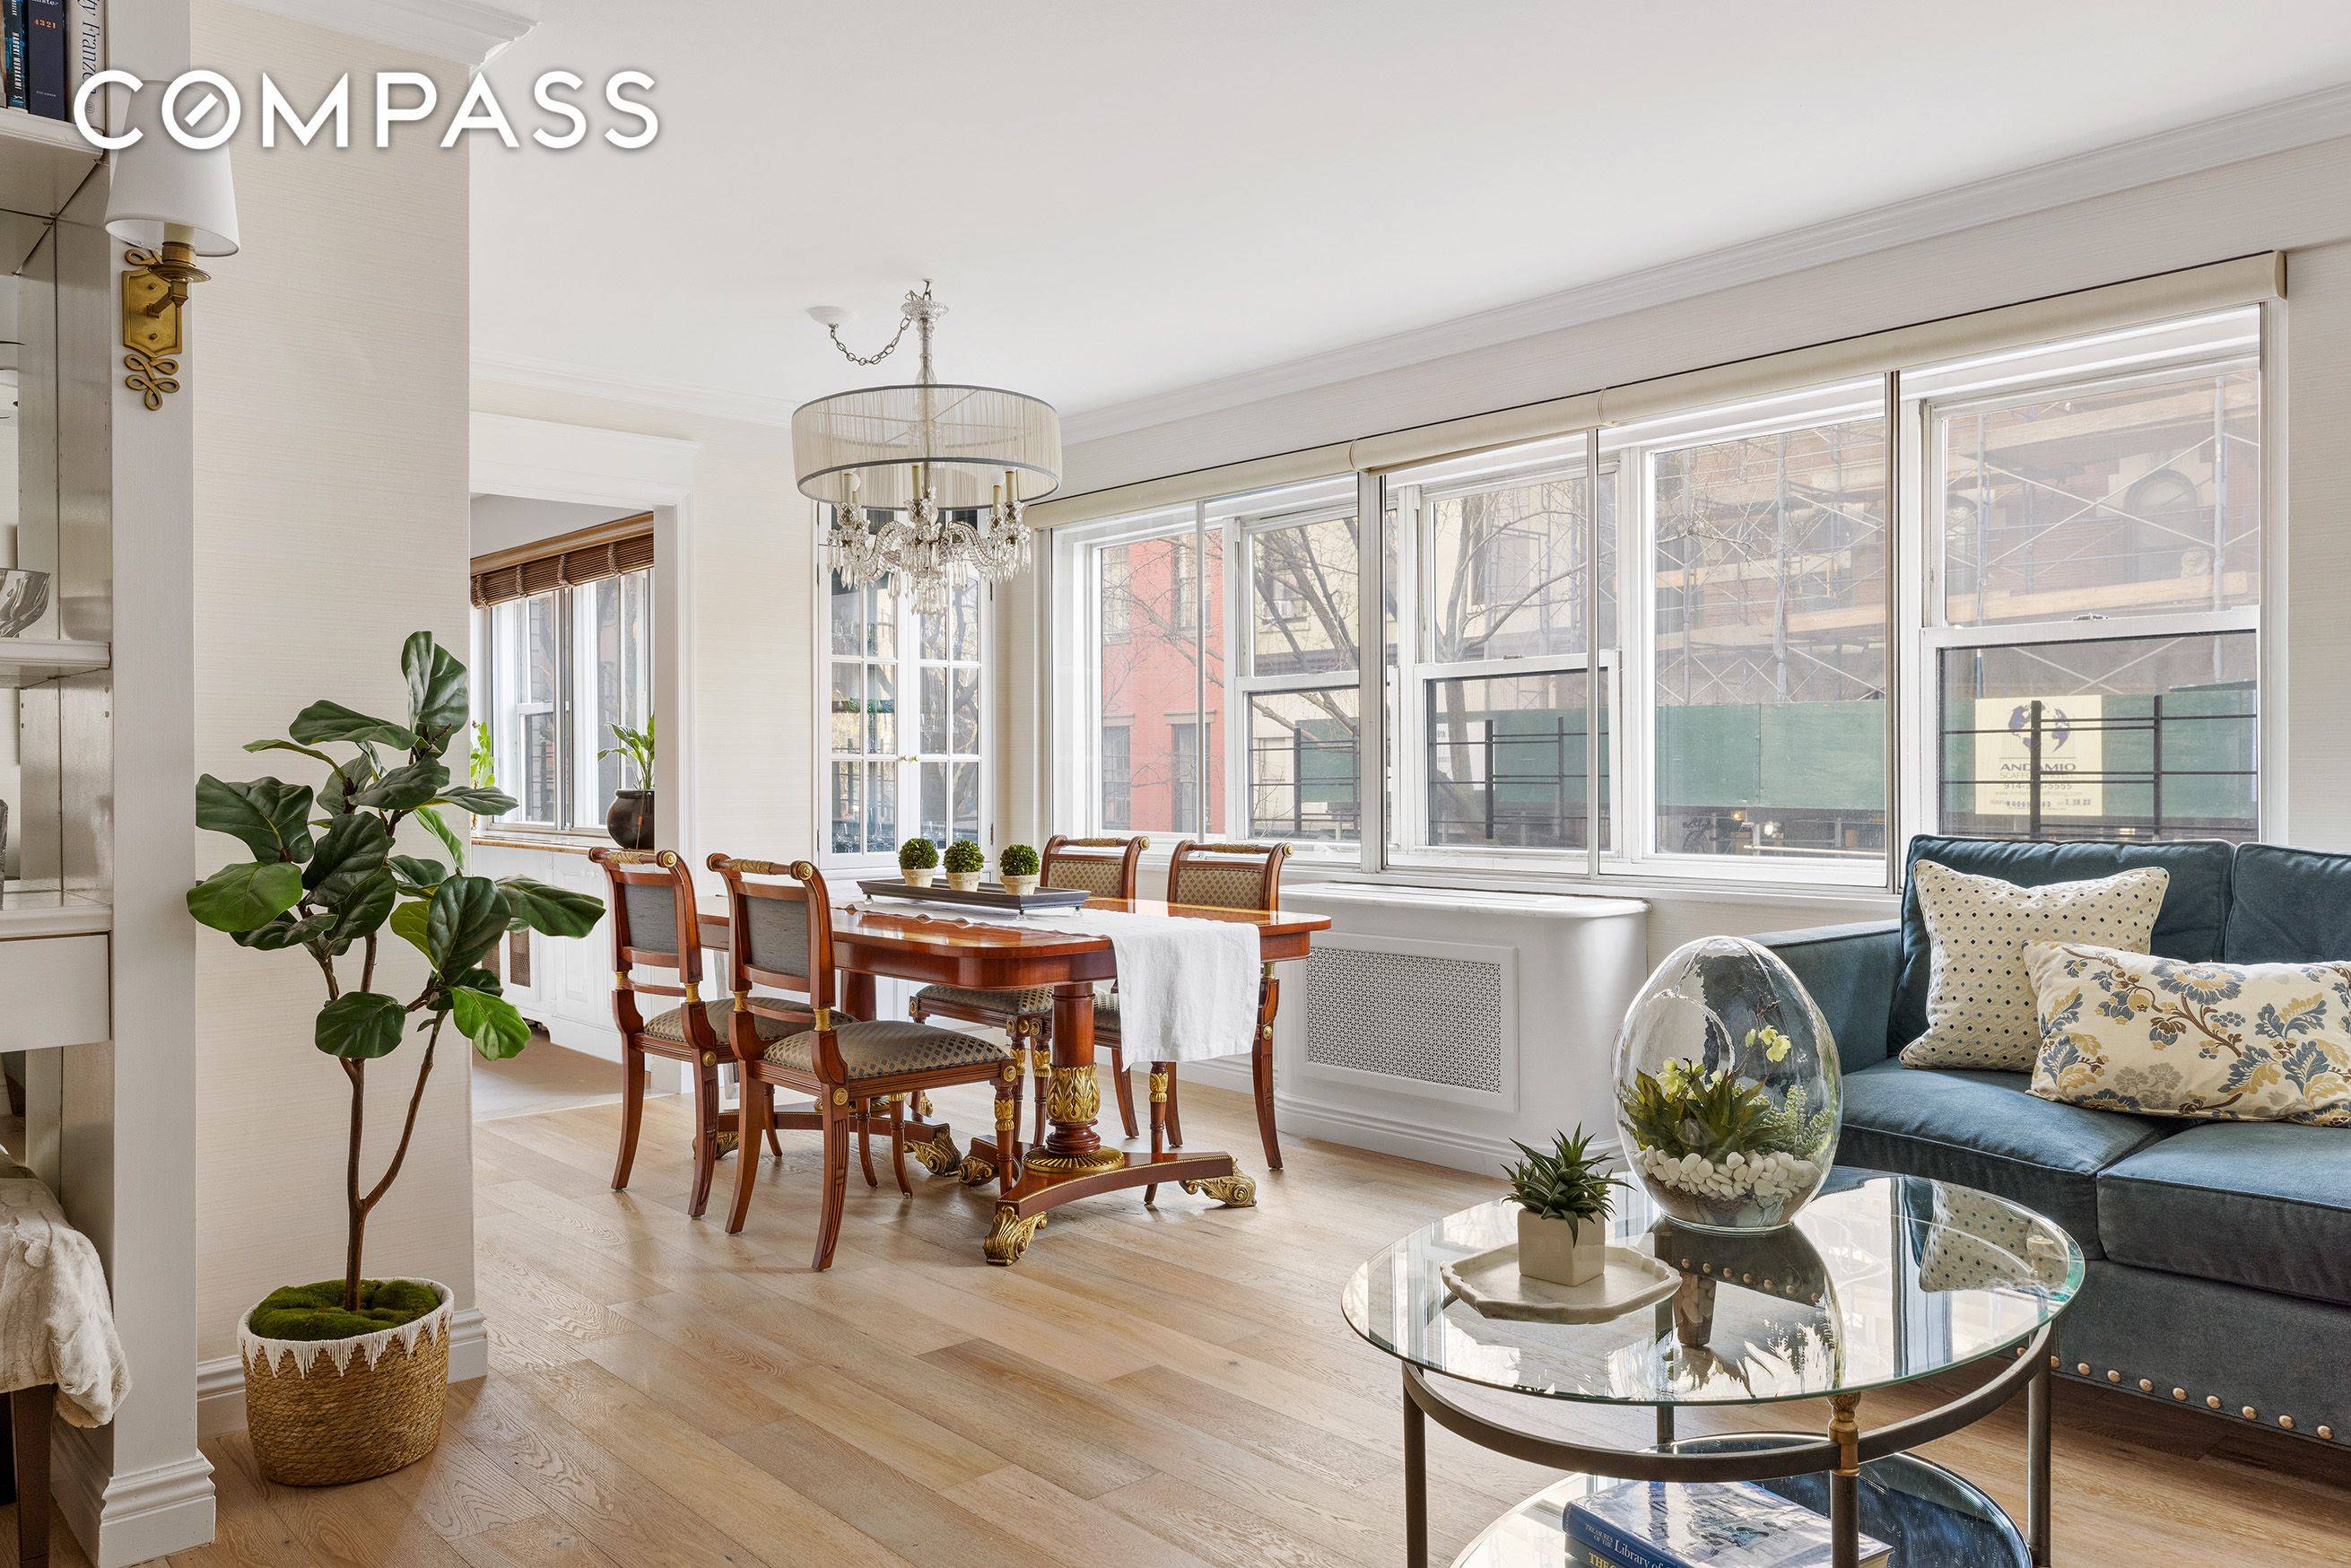 GREENWICH VILLAGE LIFESTYLE This rare, beautifully designed 4 bedroom, 4.